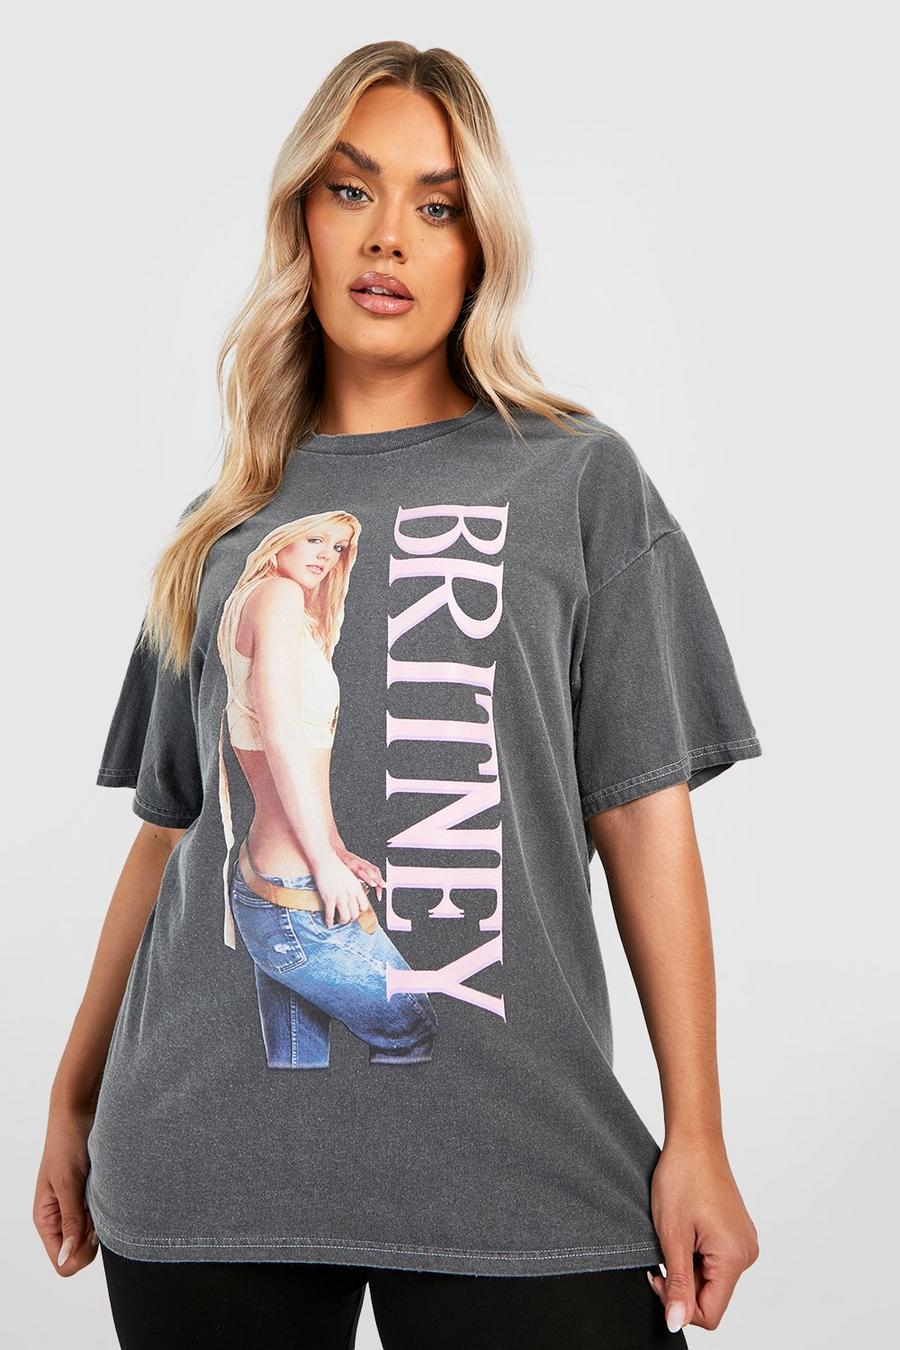 Charcoal grey Plus Britney Spears Licensed T-Shirt image number 1